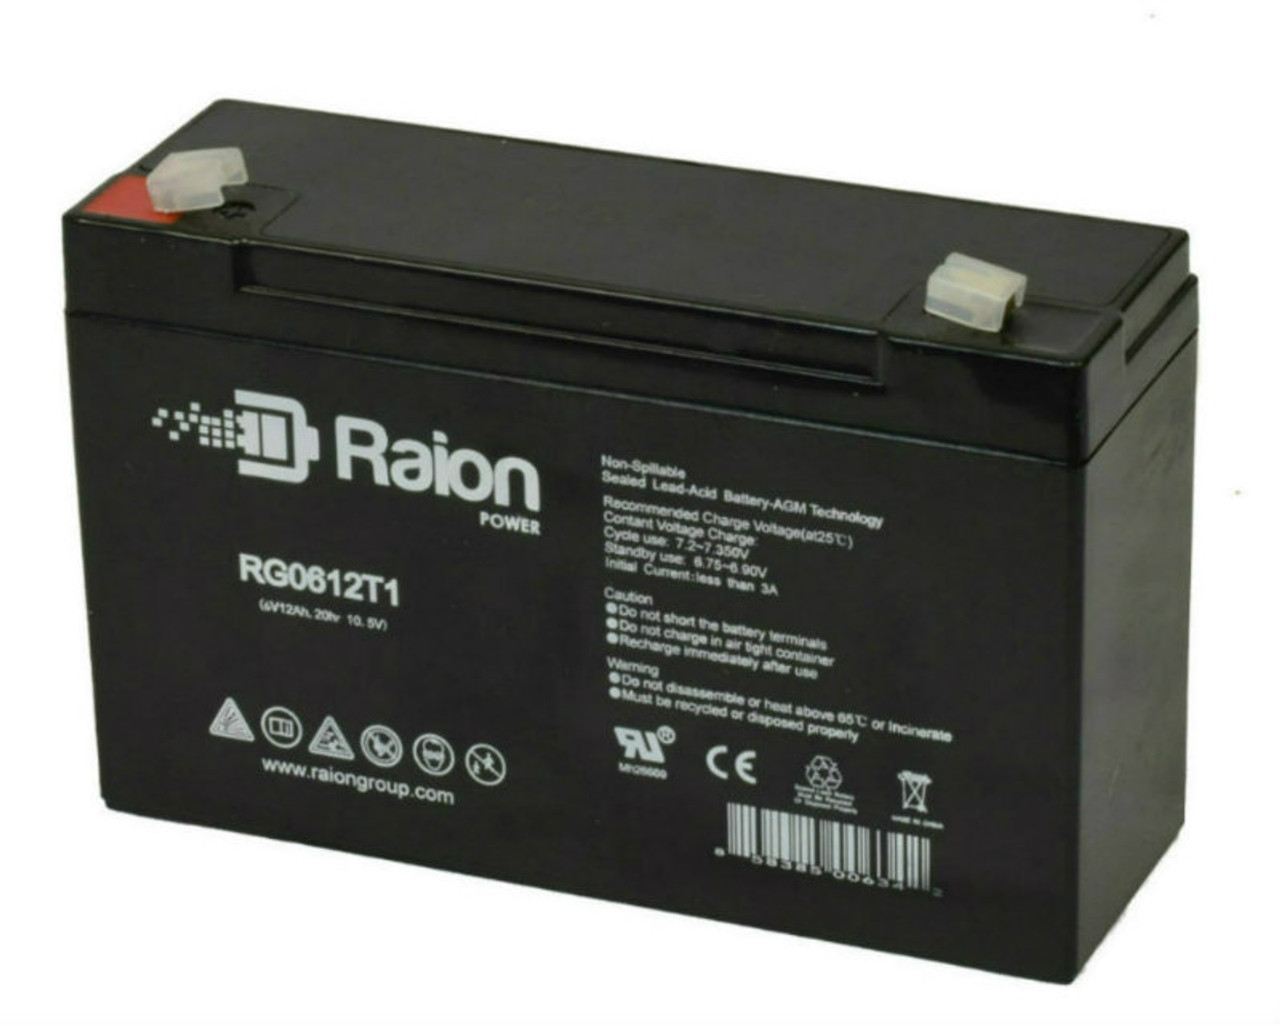 Raion Power RG06120T1 Replacement Battery for BSB GB6-12